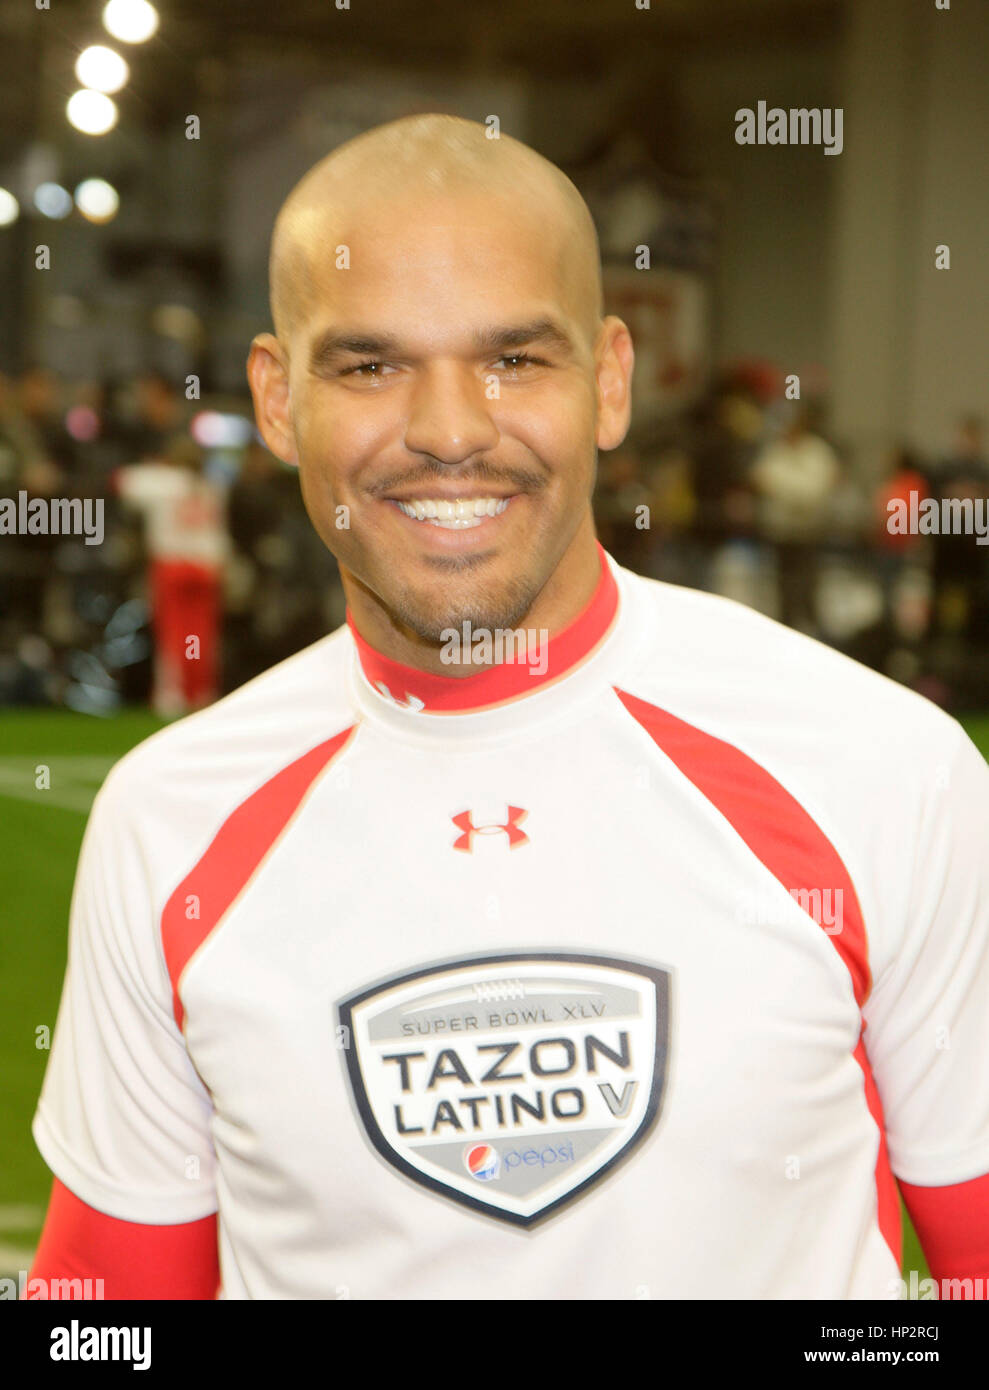 Amaury Nolasco at the Tazon Latino V flag football game at Super Bowl NFL Experience at the Dallas Convention Center on February 2, 2011 in Dallas, Texas. Photo by Francis Specker Stock Photo